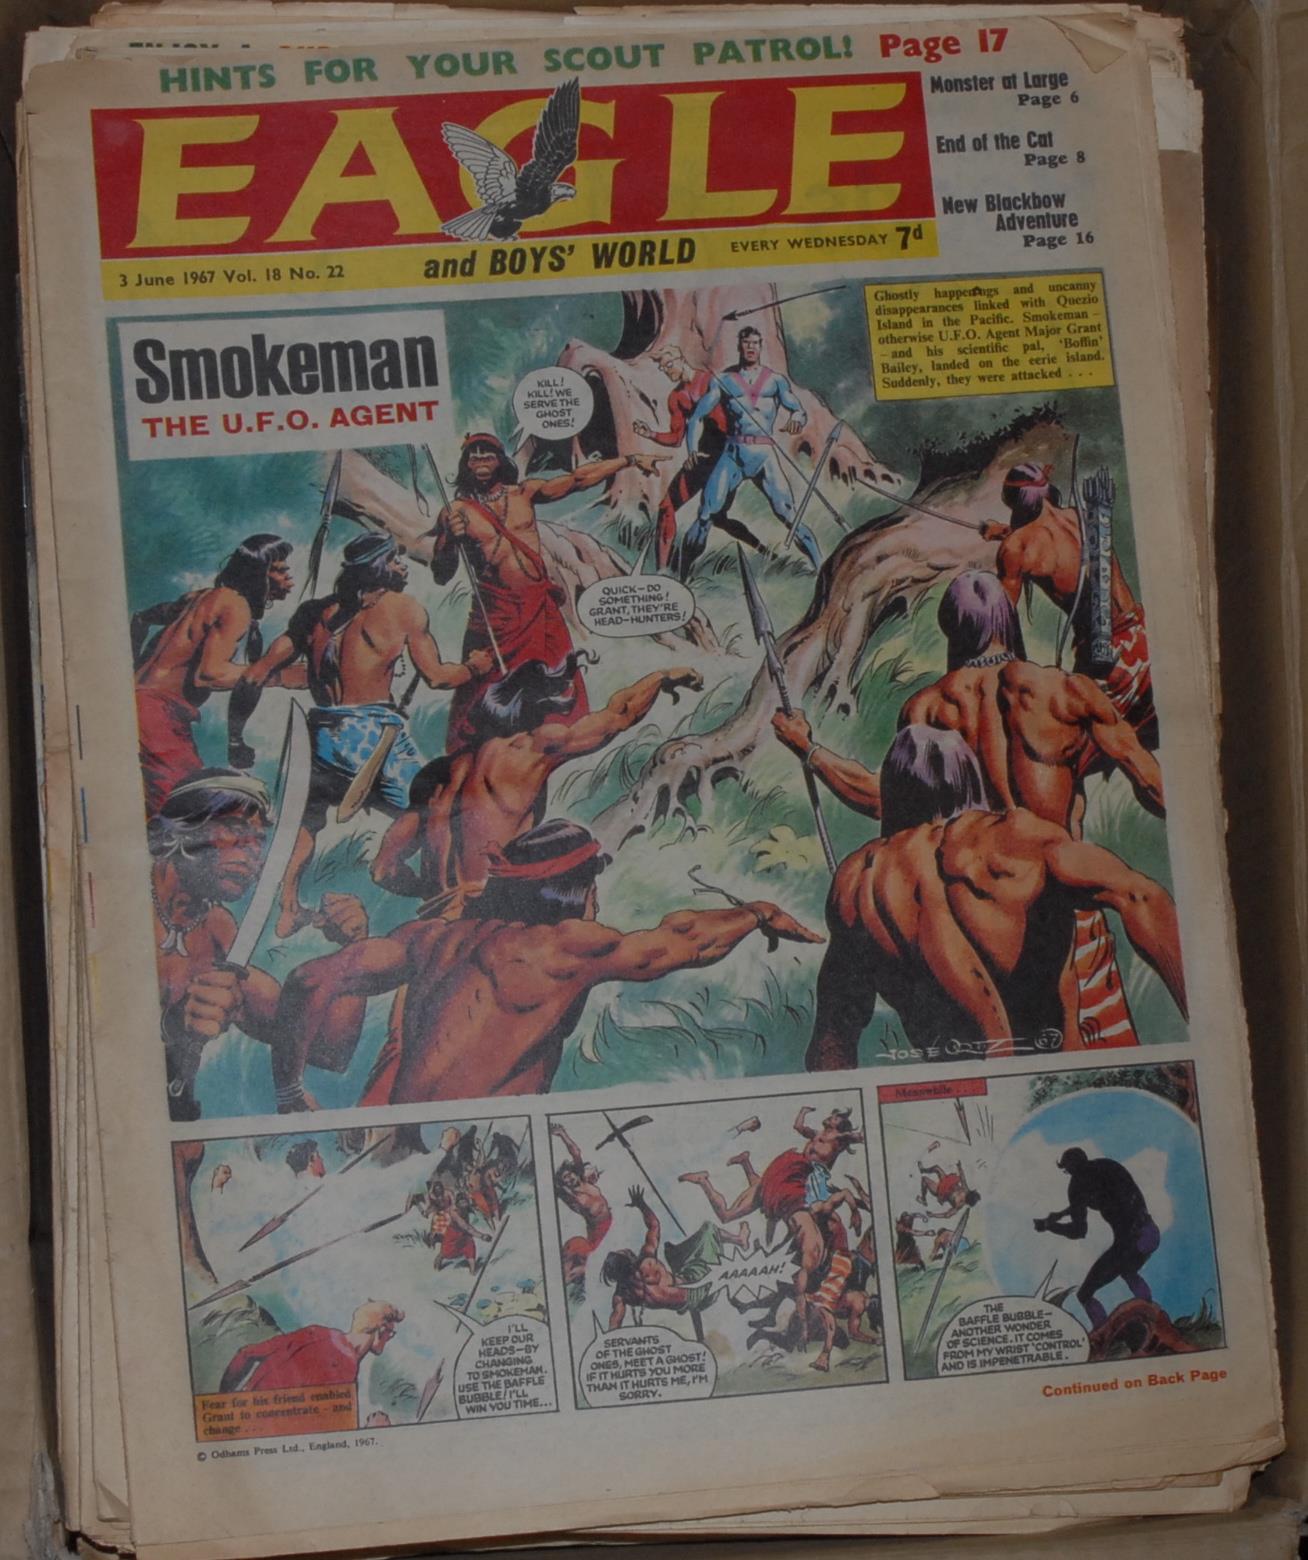 Comic Books - The Eagle, 1960s-1990s, original wrappers, qty, [1 box]